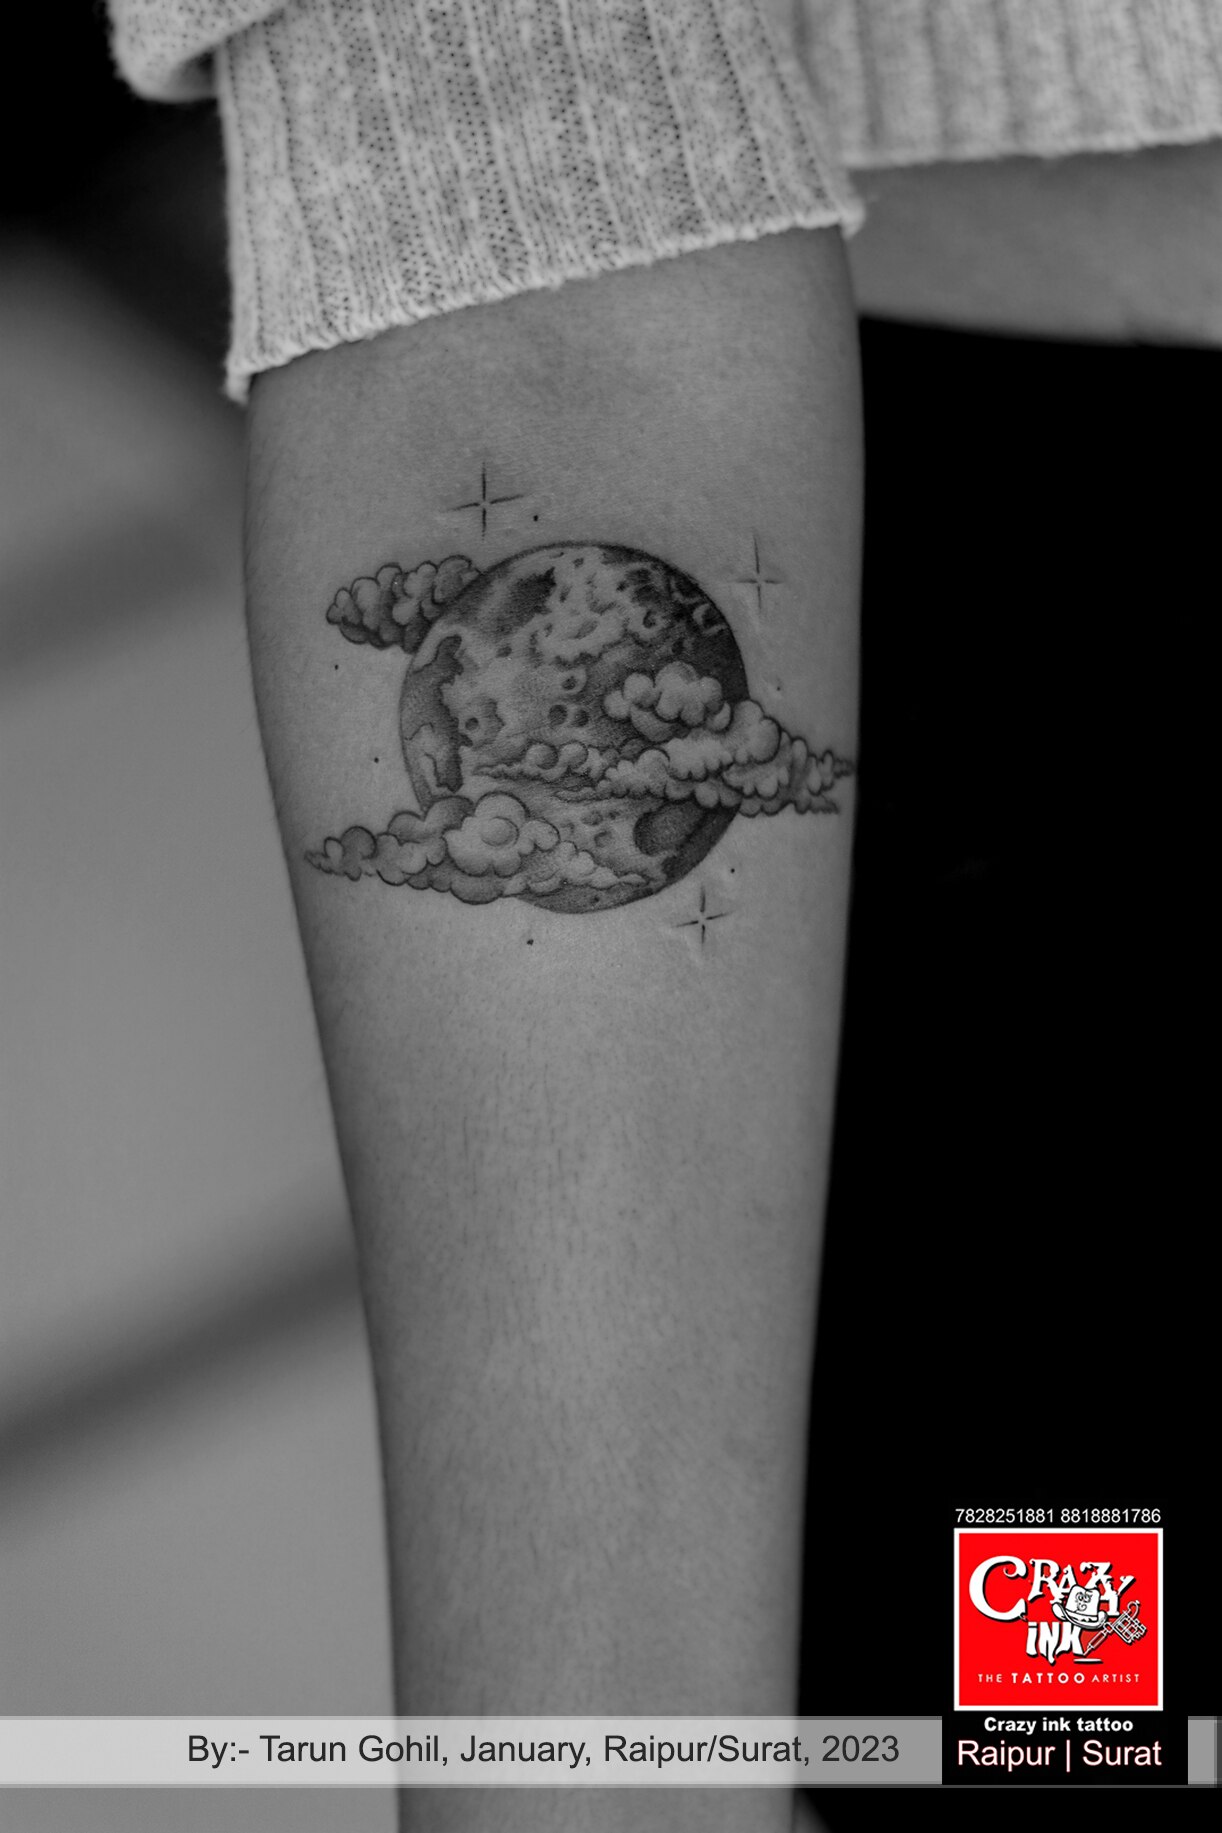 Cloud tattoo on the inner forearm.